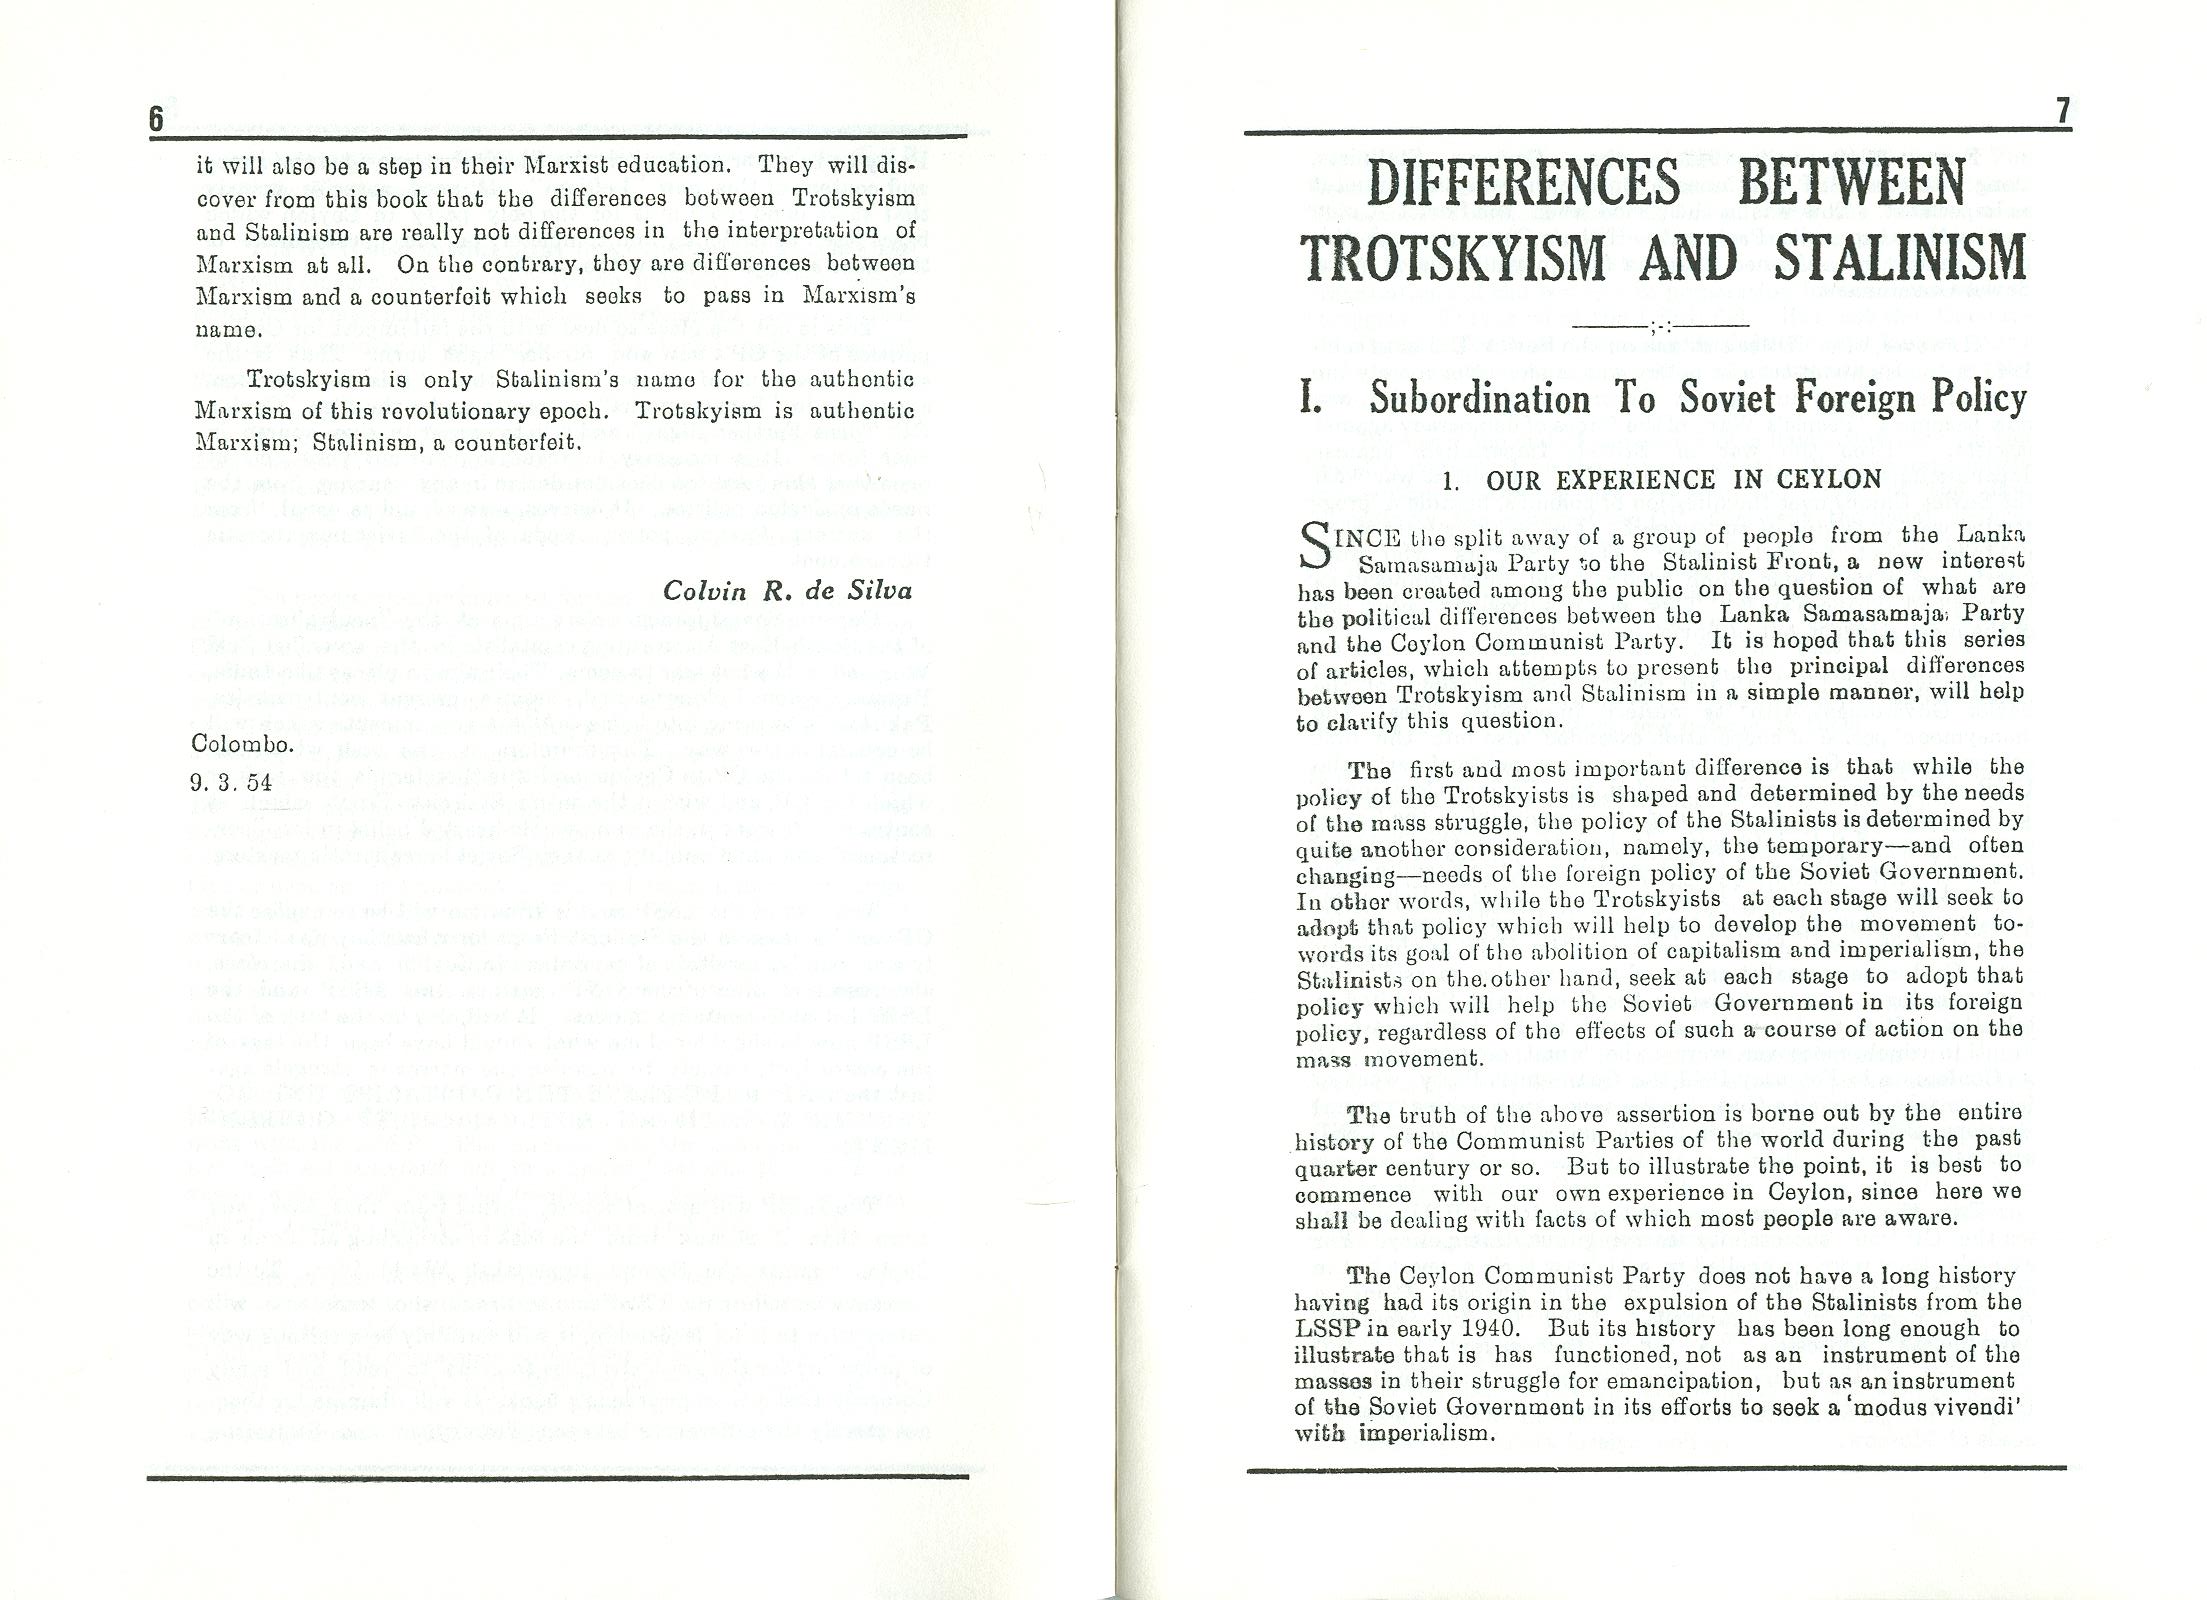 Leslie Goonewardene, The Differences between Trotskyism and Stalinism [1954] (1995) - pag. 5